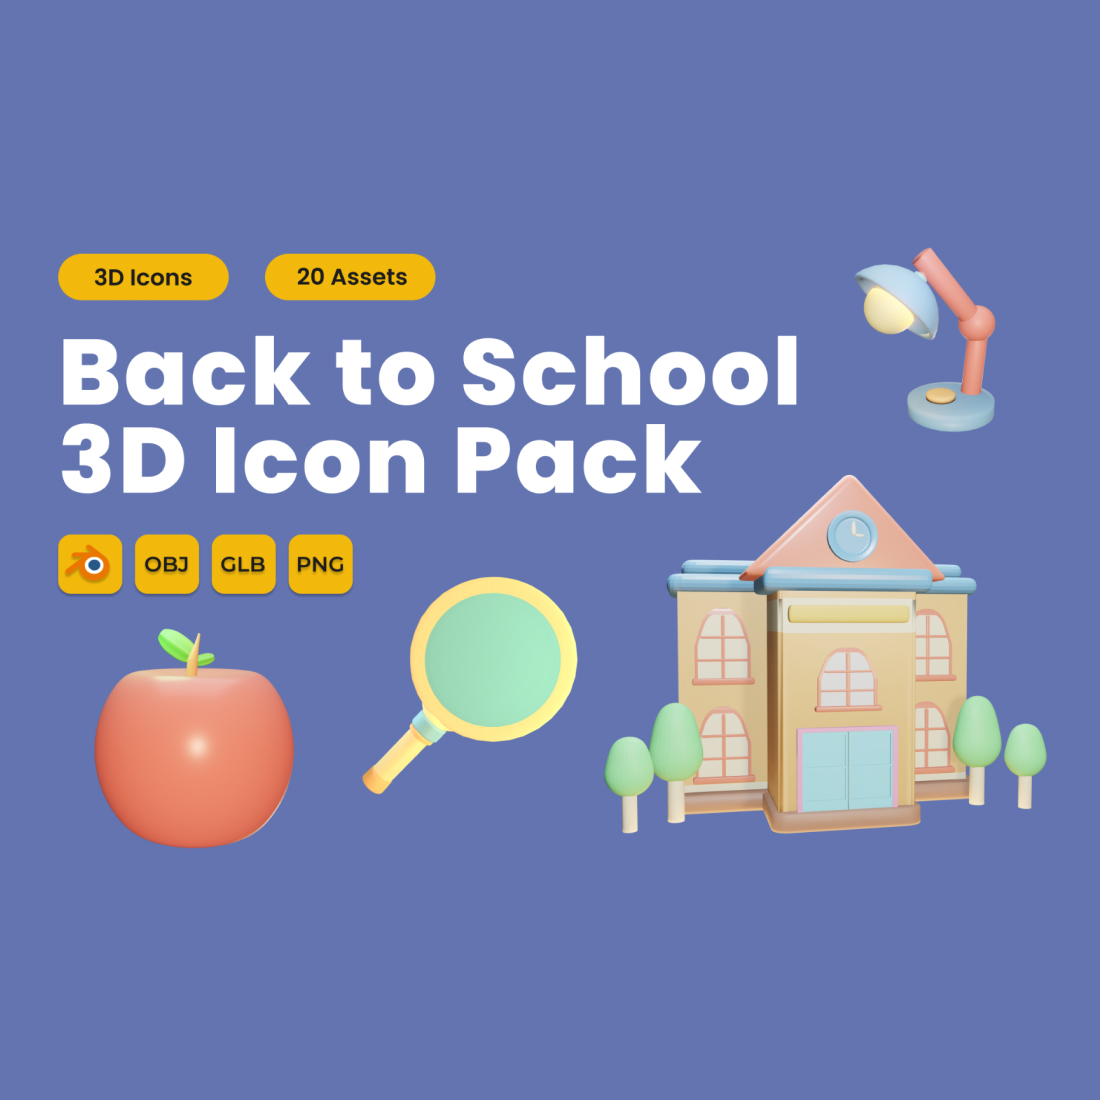 Back to School 3D Icon Pack Vol 6 cover image.